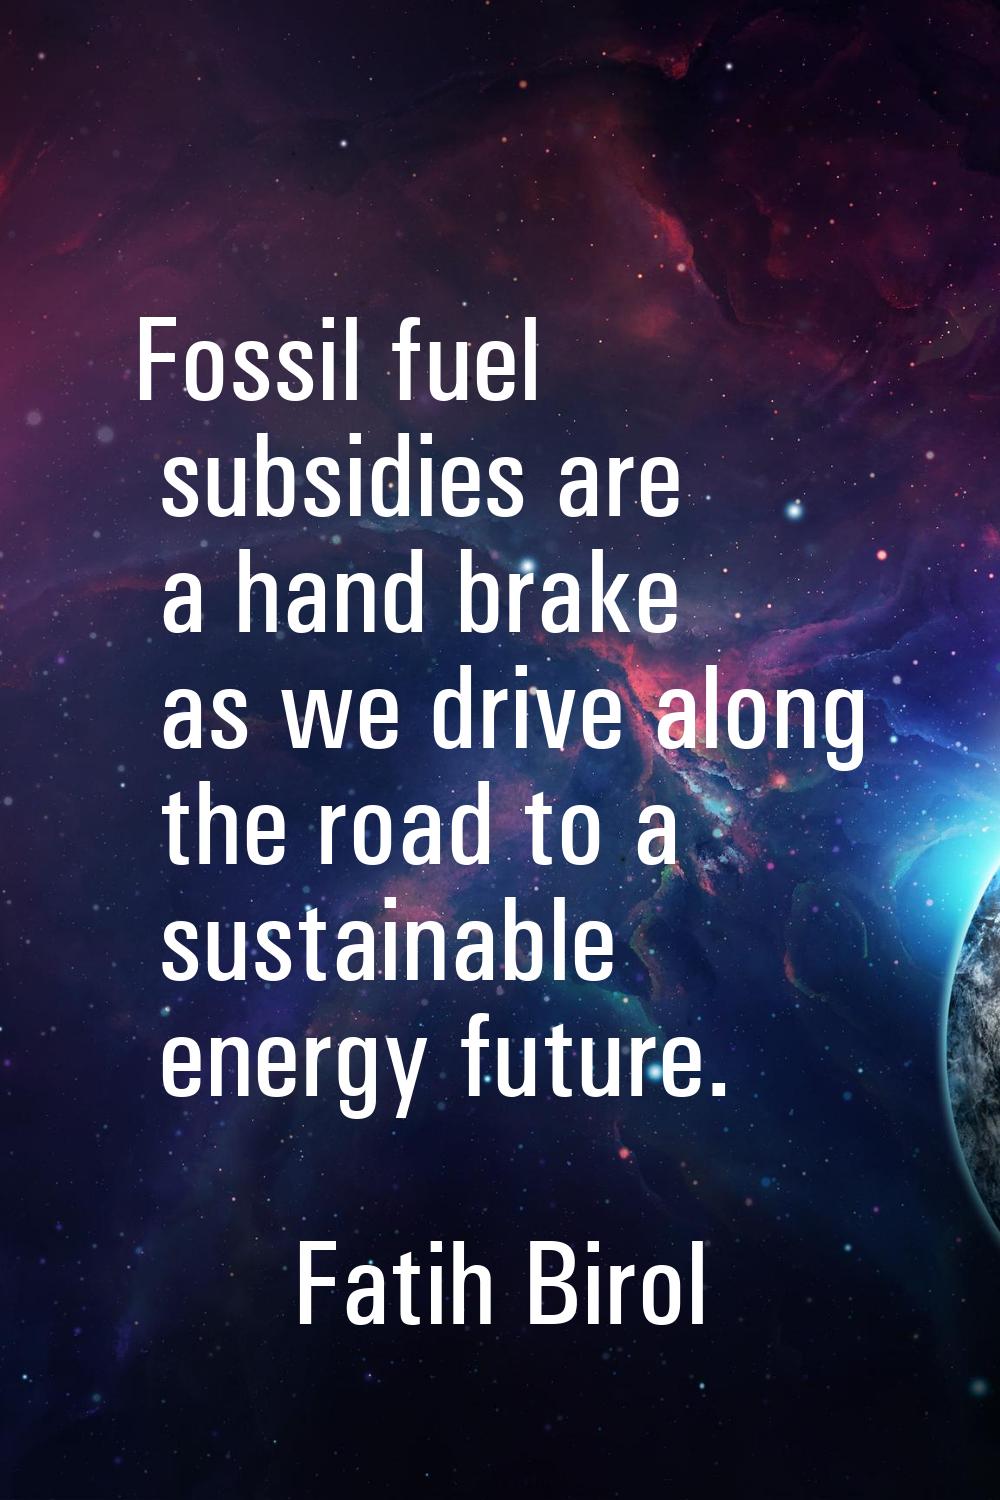 Fossil fuel subsidies are a hand brake as we drive along the road to a sustainable energy future.